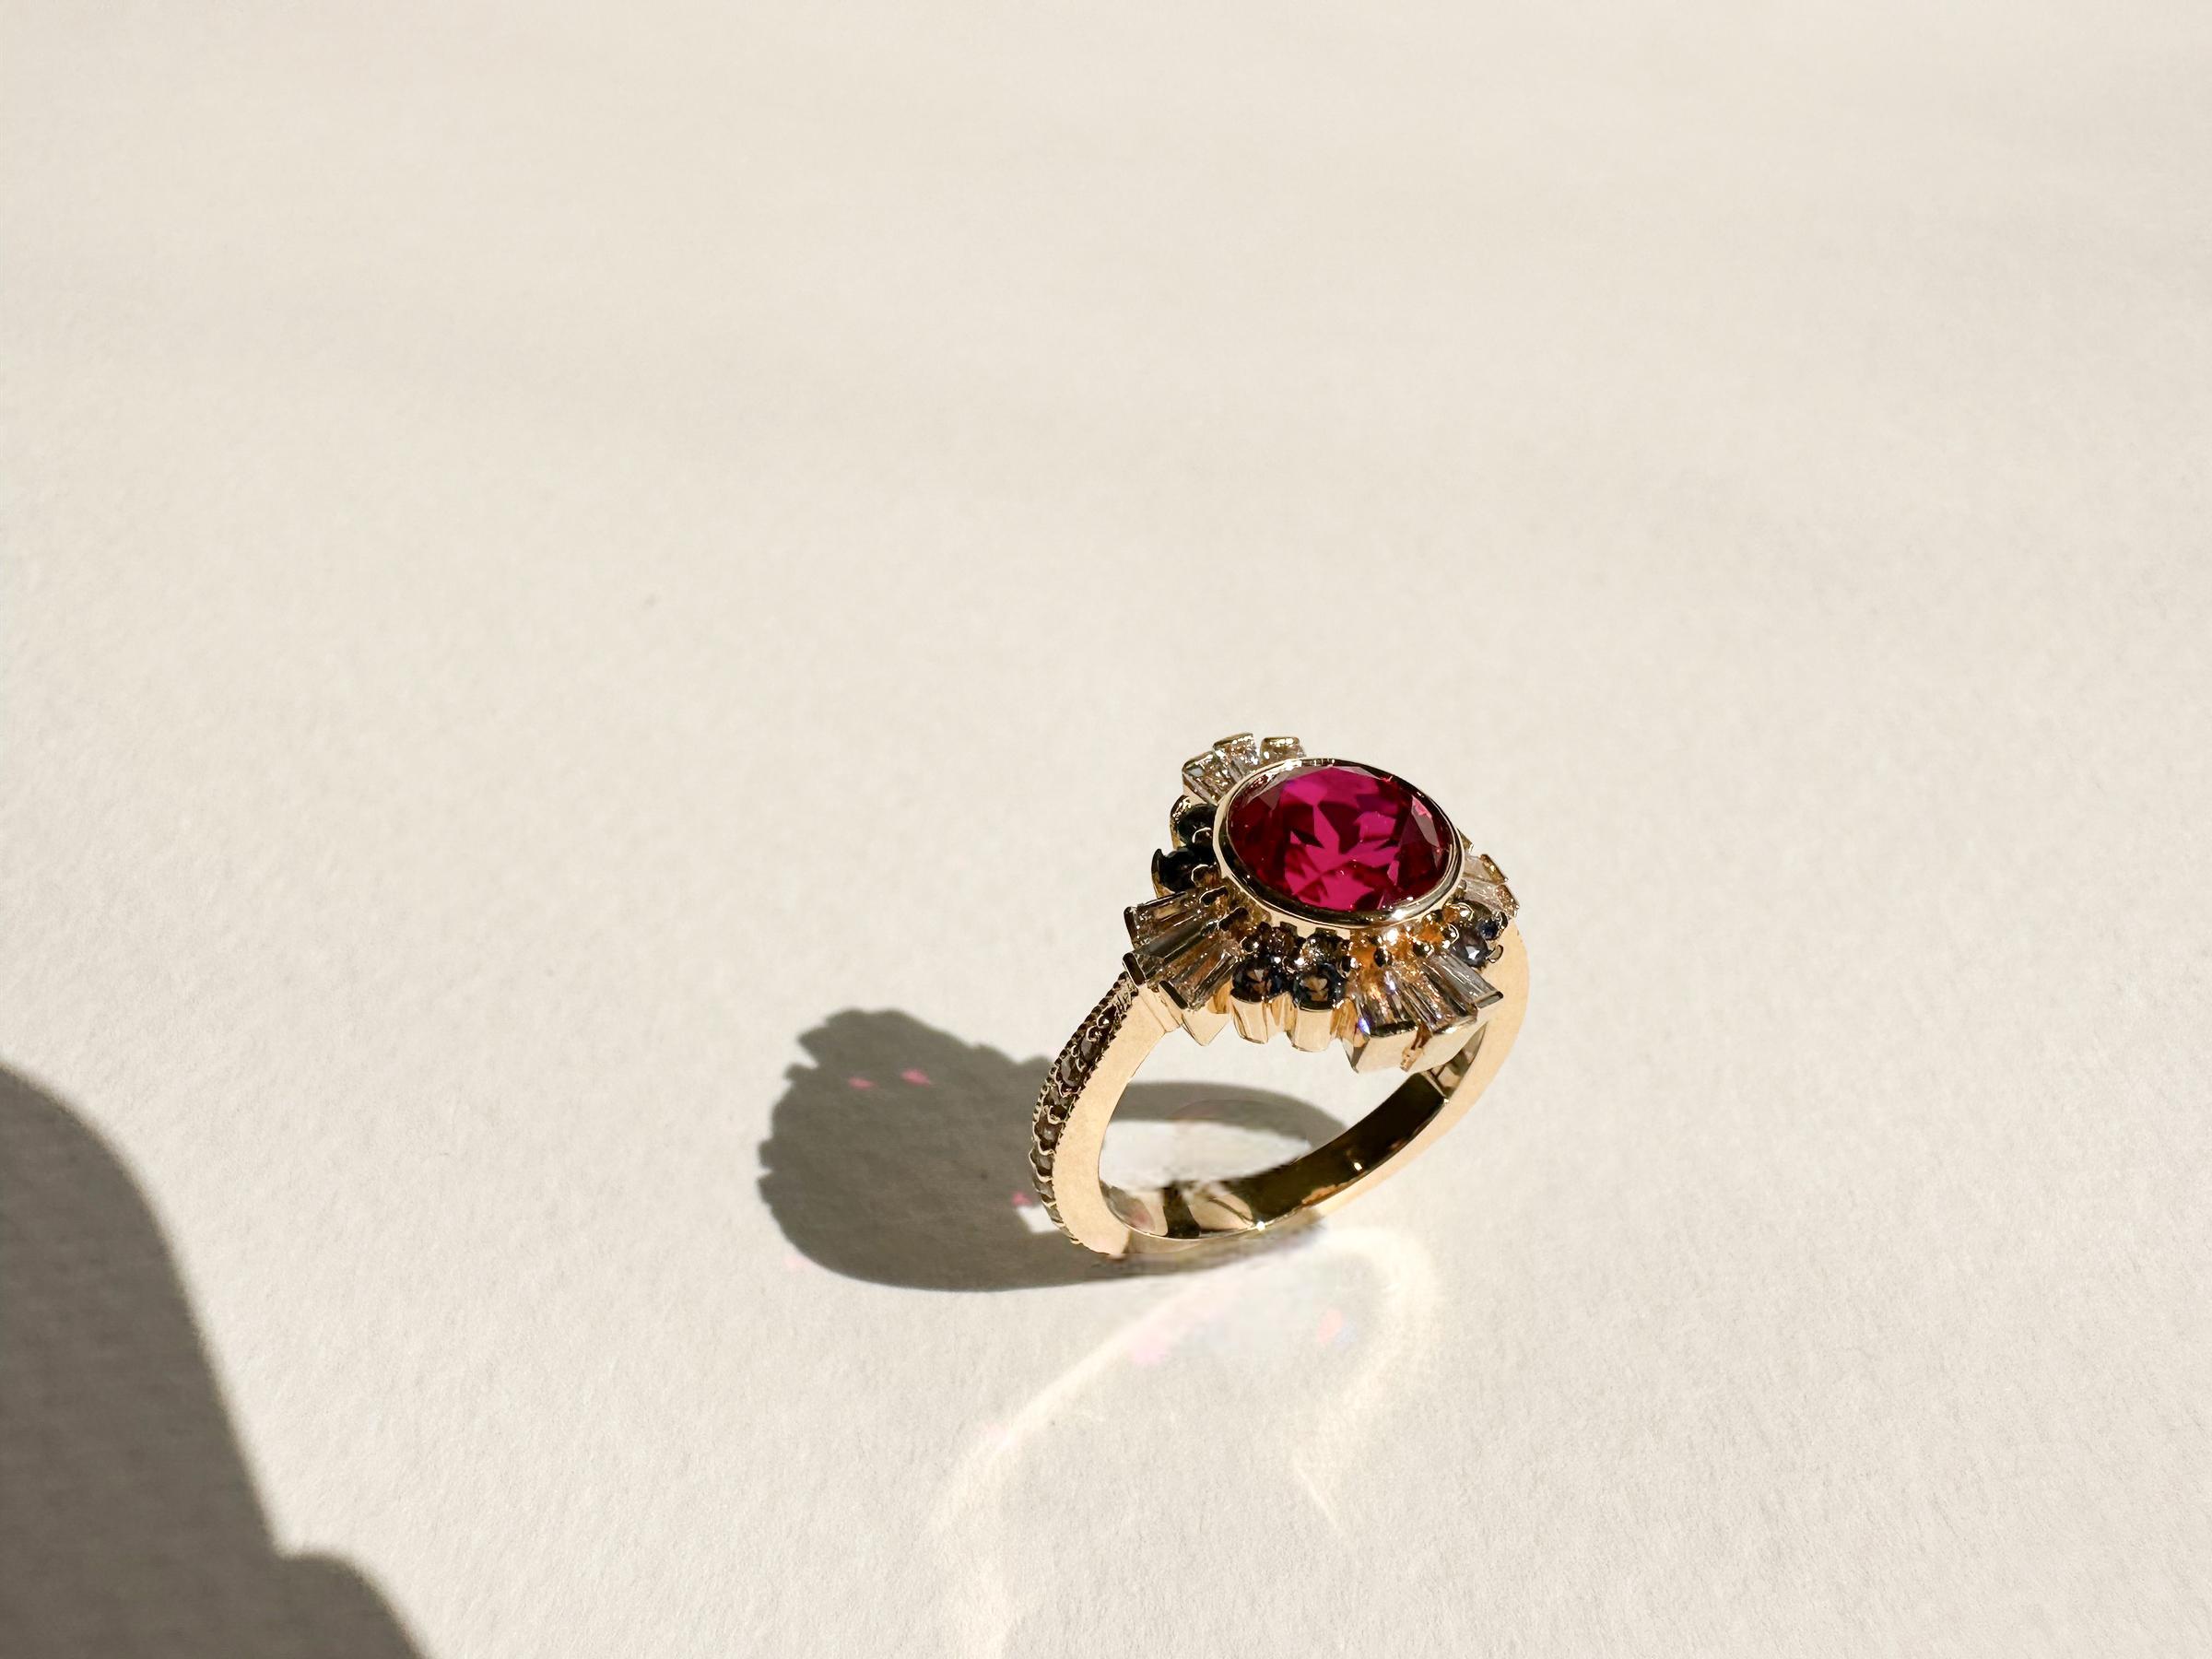 1.5 carat equivalent round ruby in full bezel with an asymmetrical halo